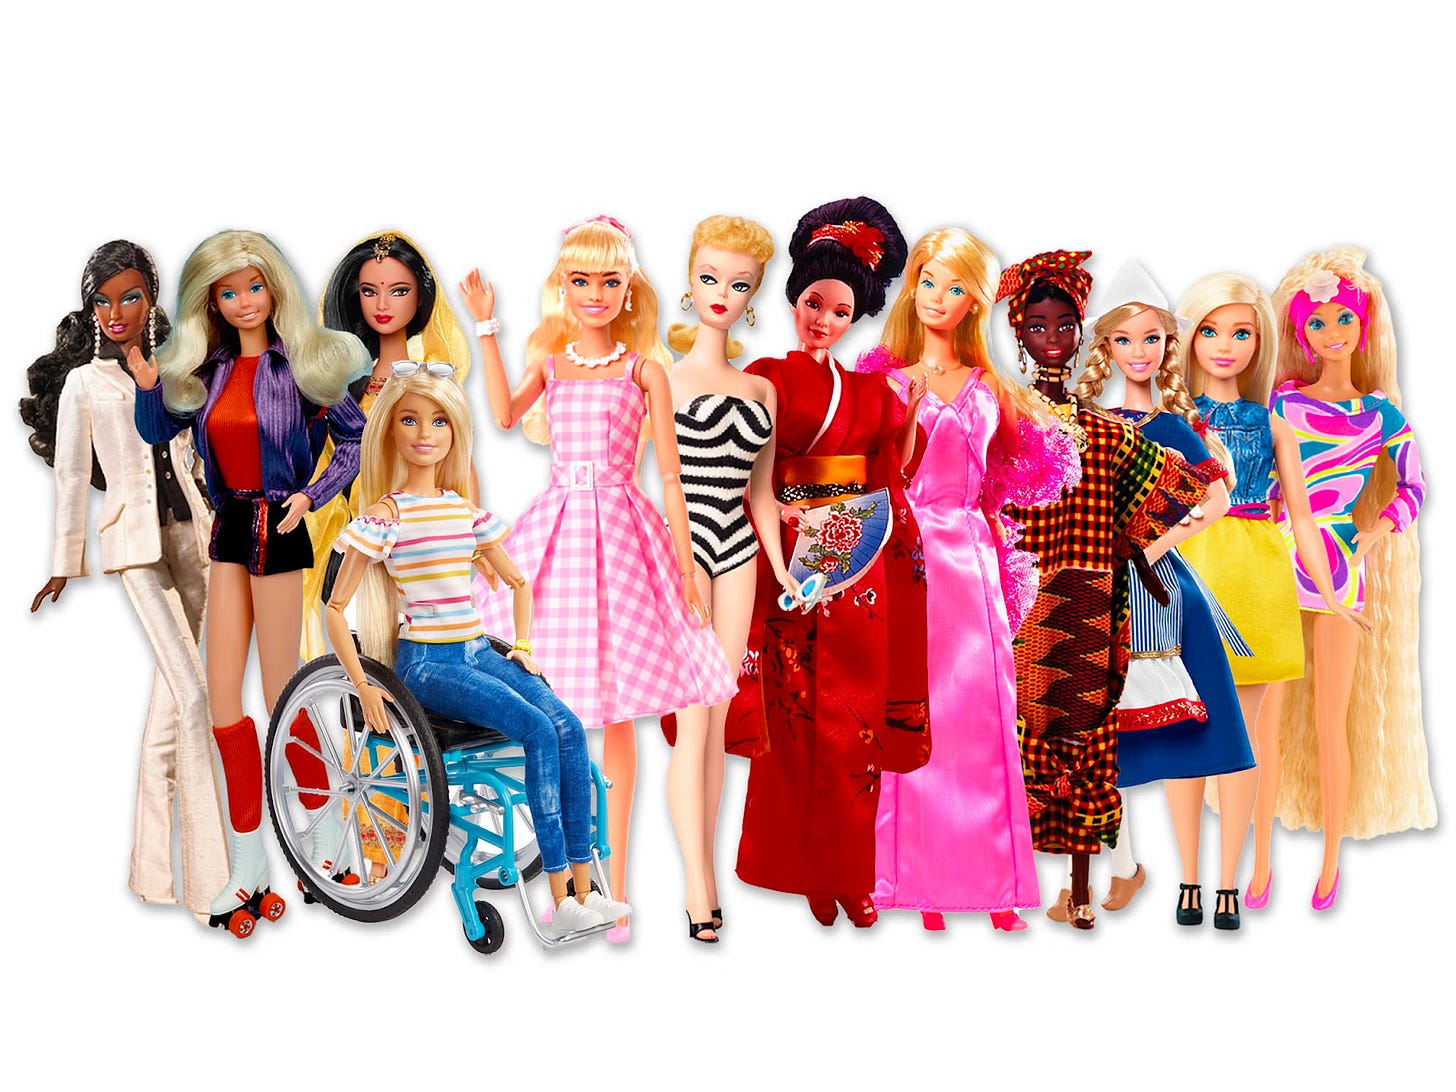 A collection of different Barbie dolls